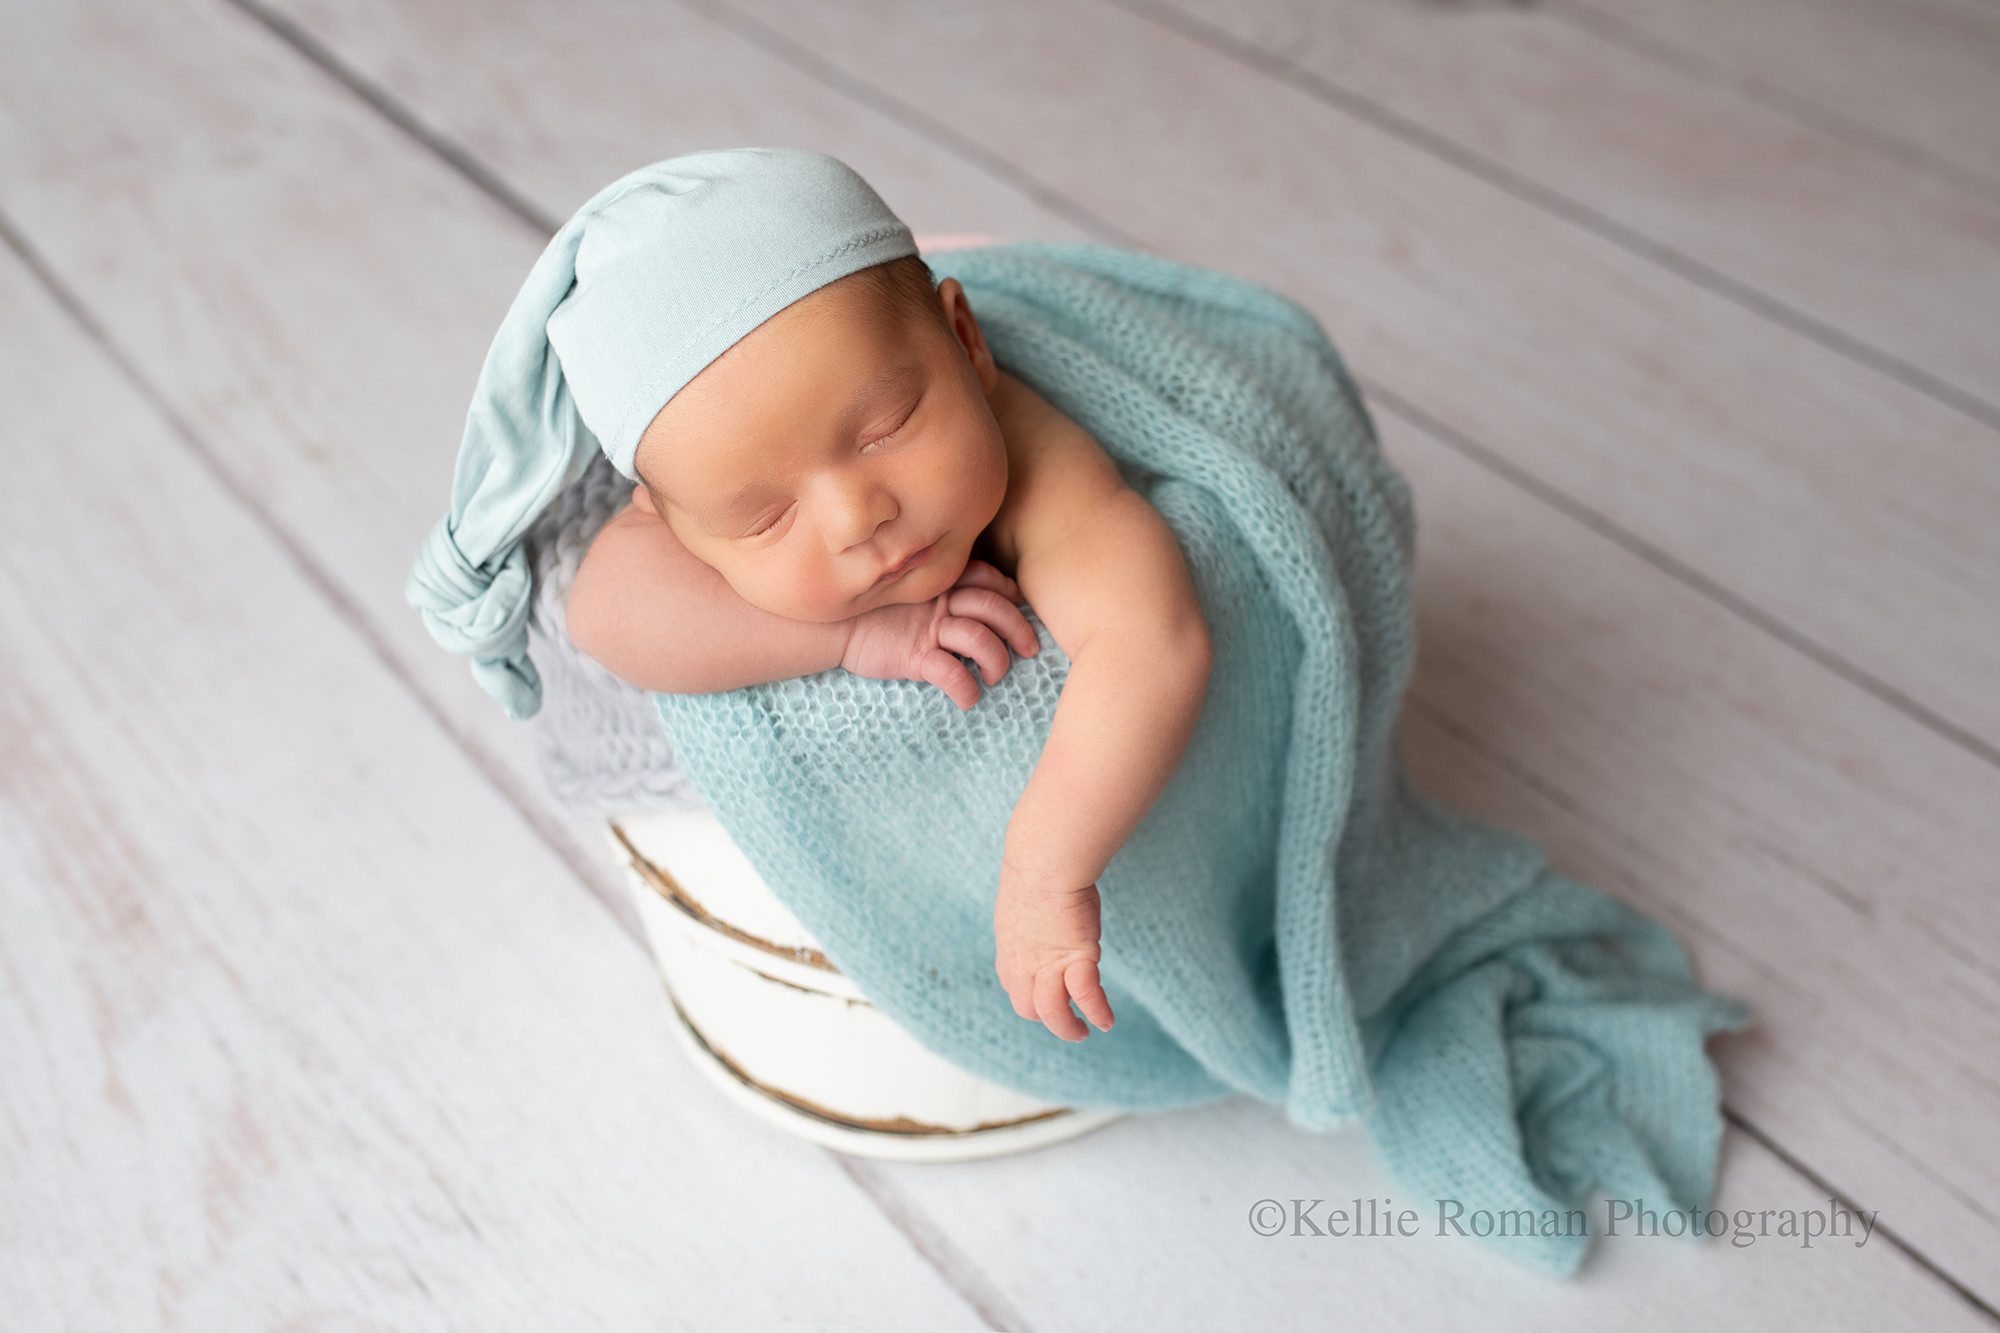 milwaukee photographer. newborn photography studio. Kellie Roman Photography. baby boy is sleeping in a white wood bucket that is stuffed with blue and grey fabrics. he has a light blue sleepy cap on. the newborn has one hand under his chin and the other hand is hanging over the edge of the bucket. 
